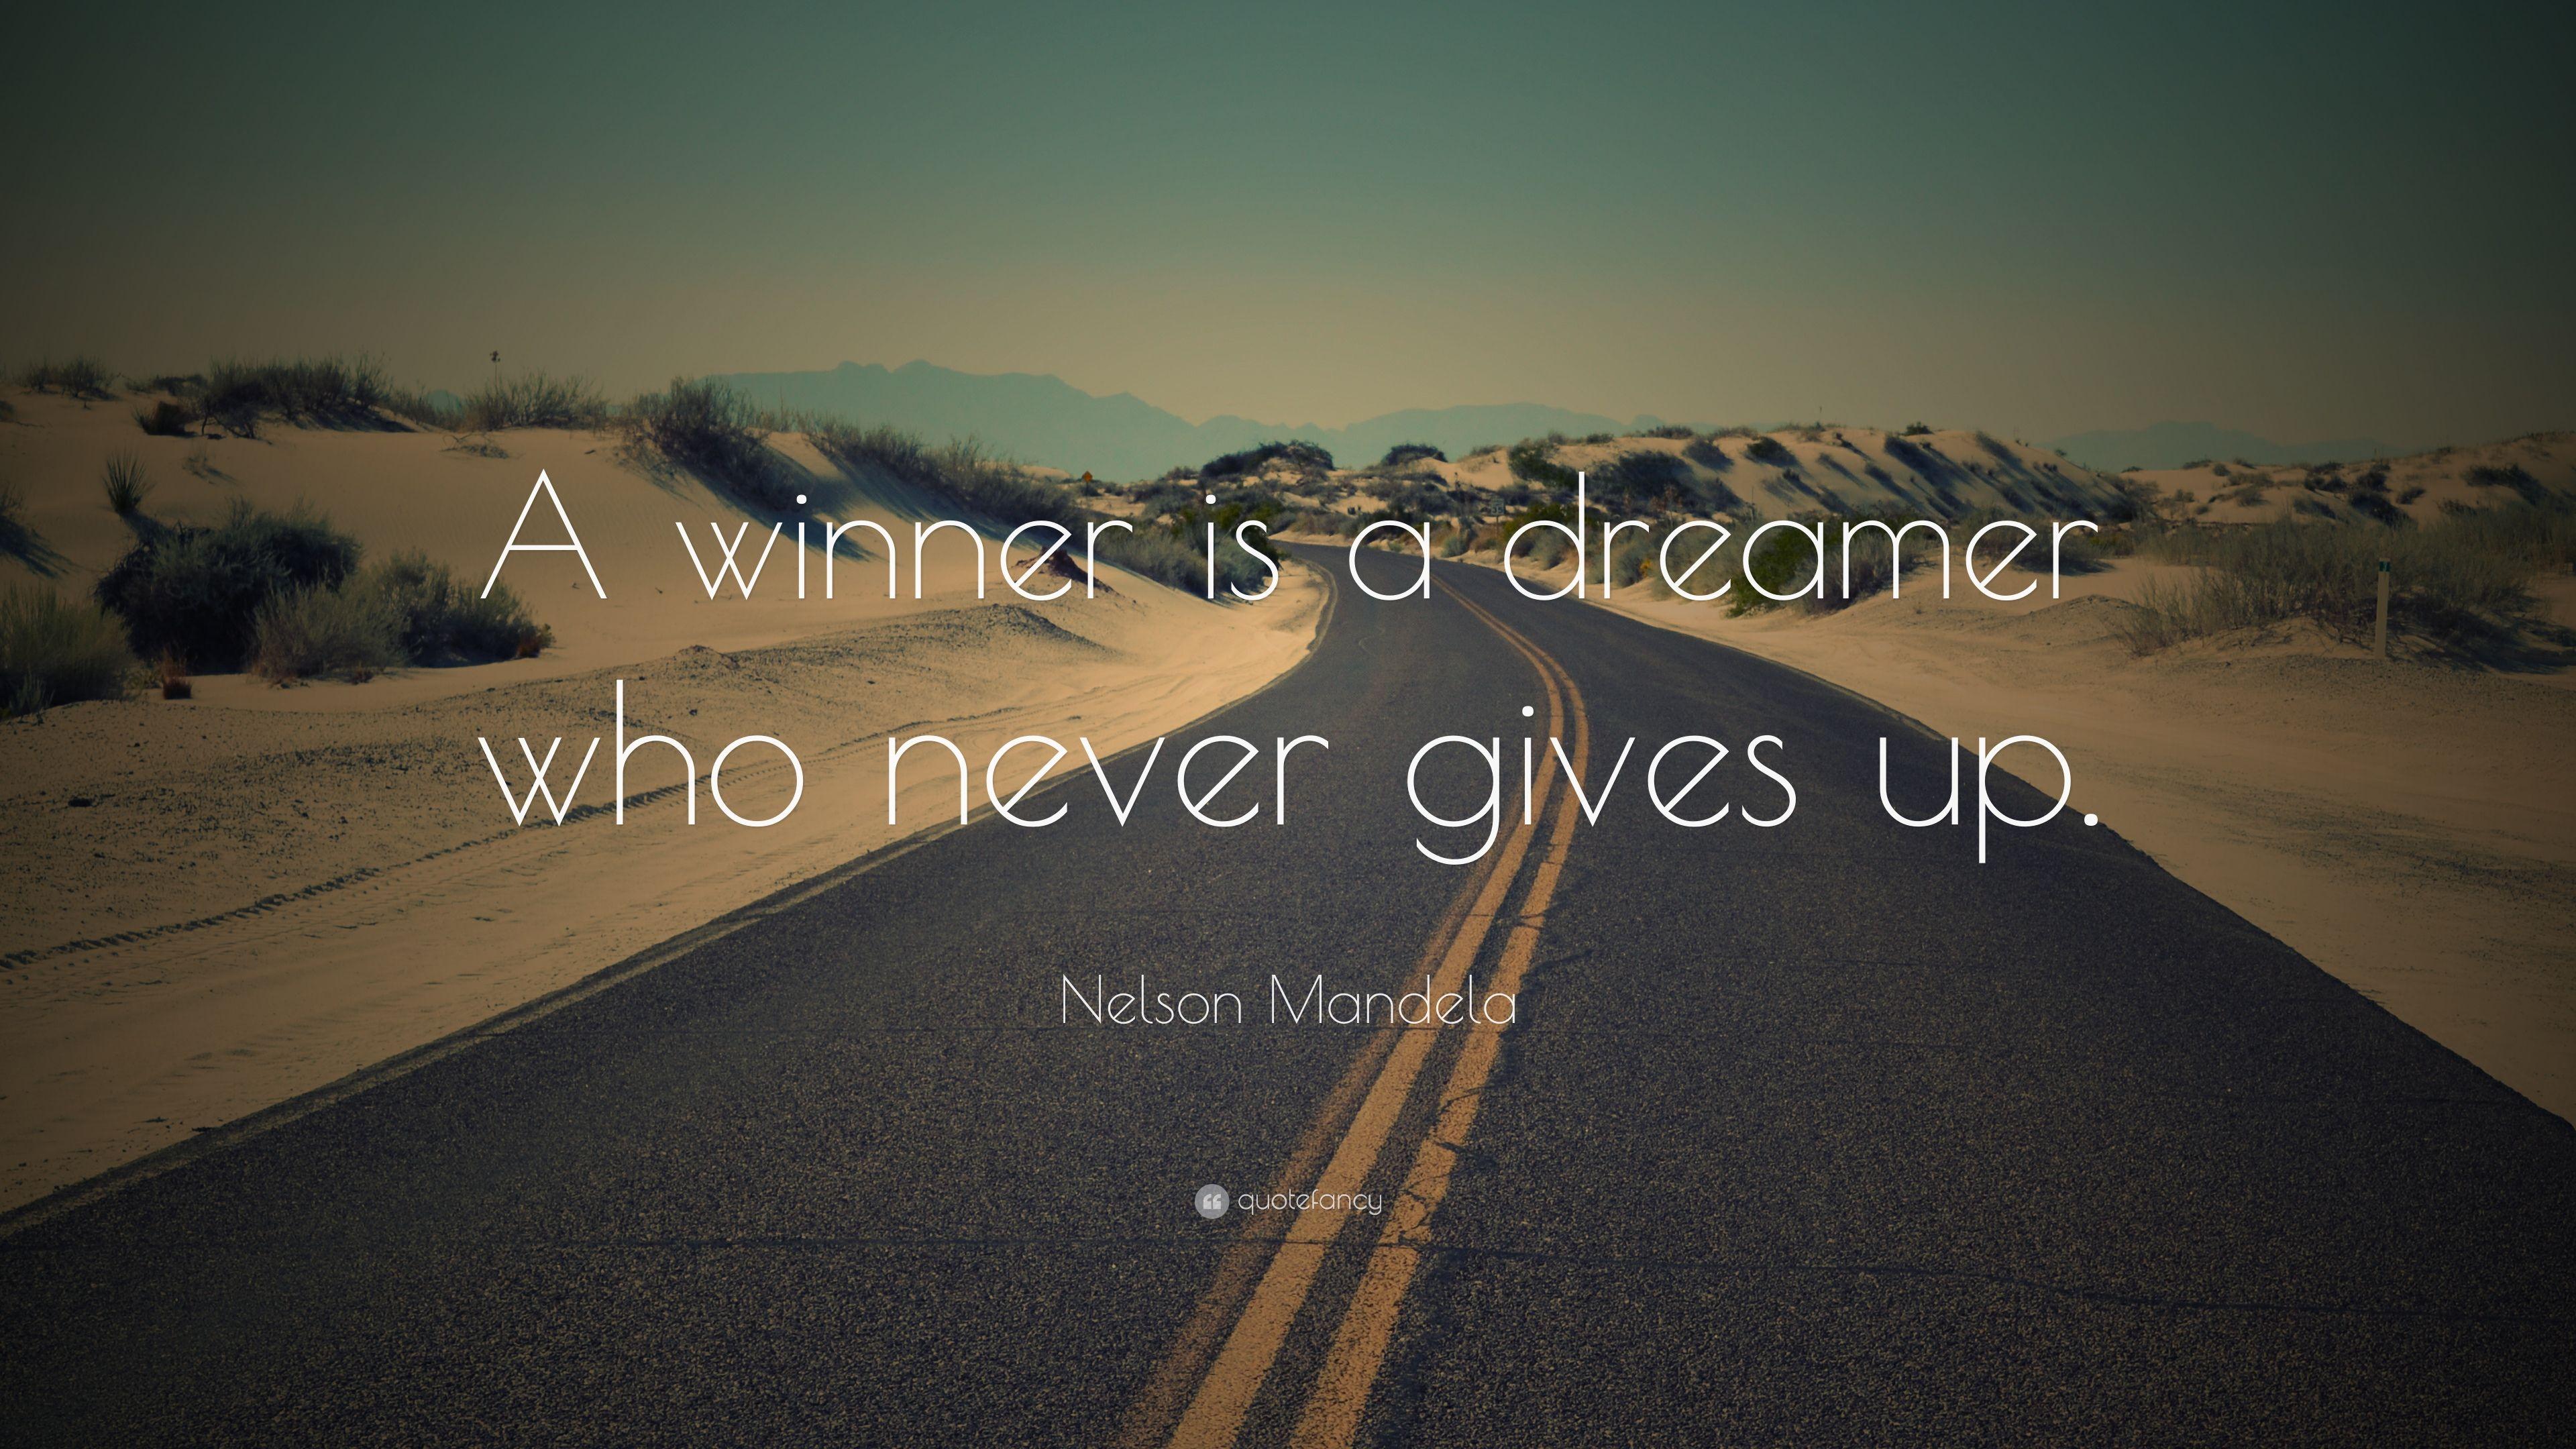 Nelson Mandela Quote: “A winner is a dreamer who never gives up